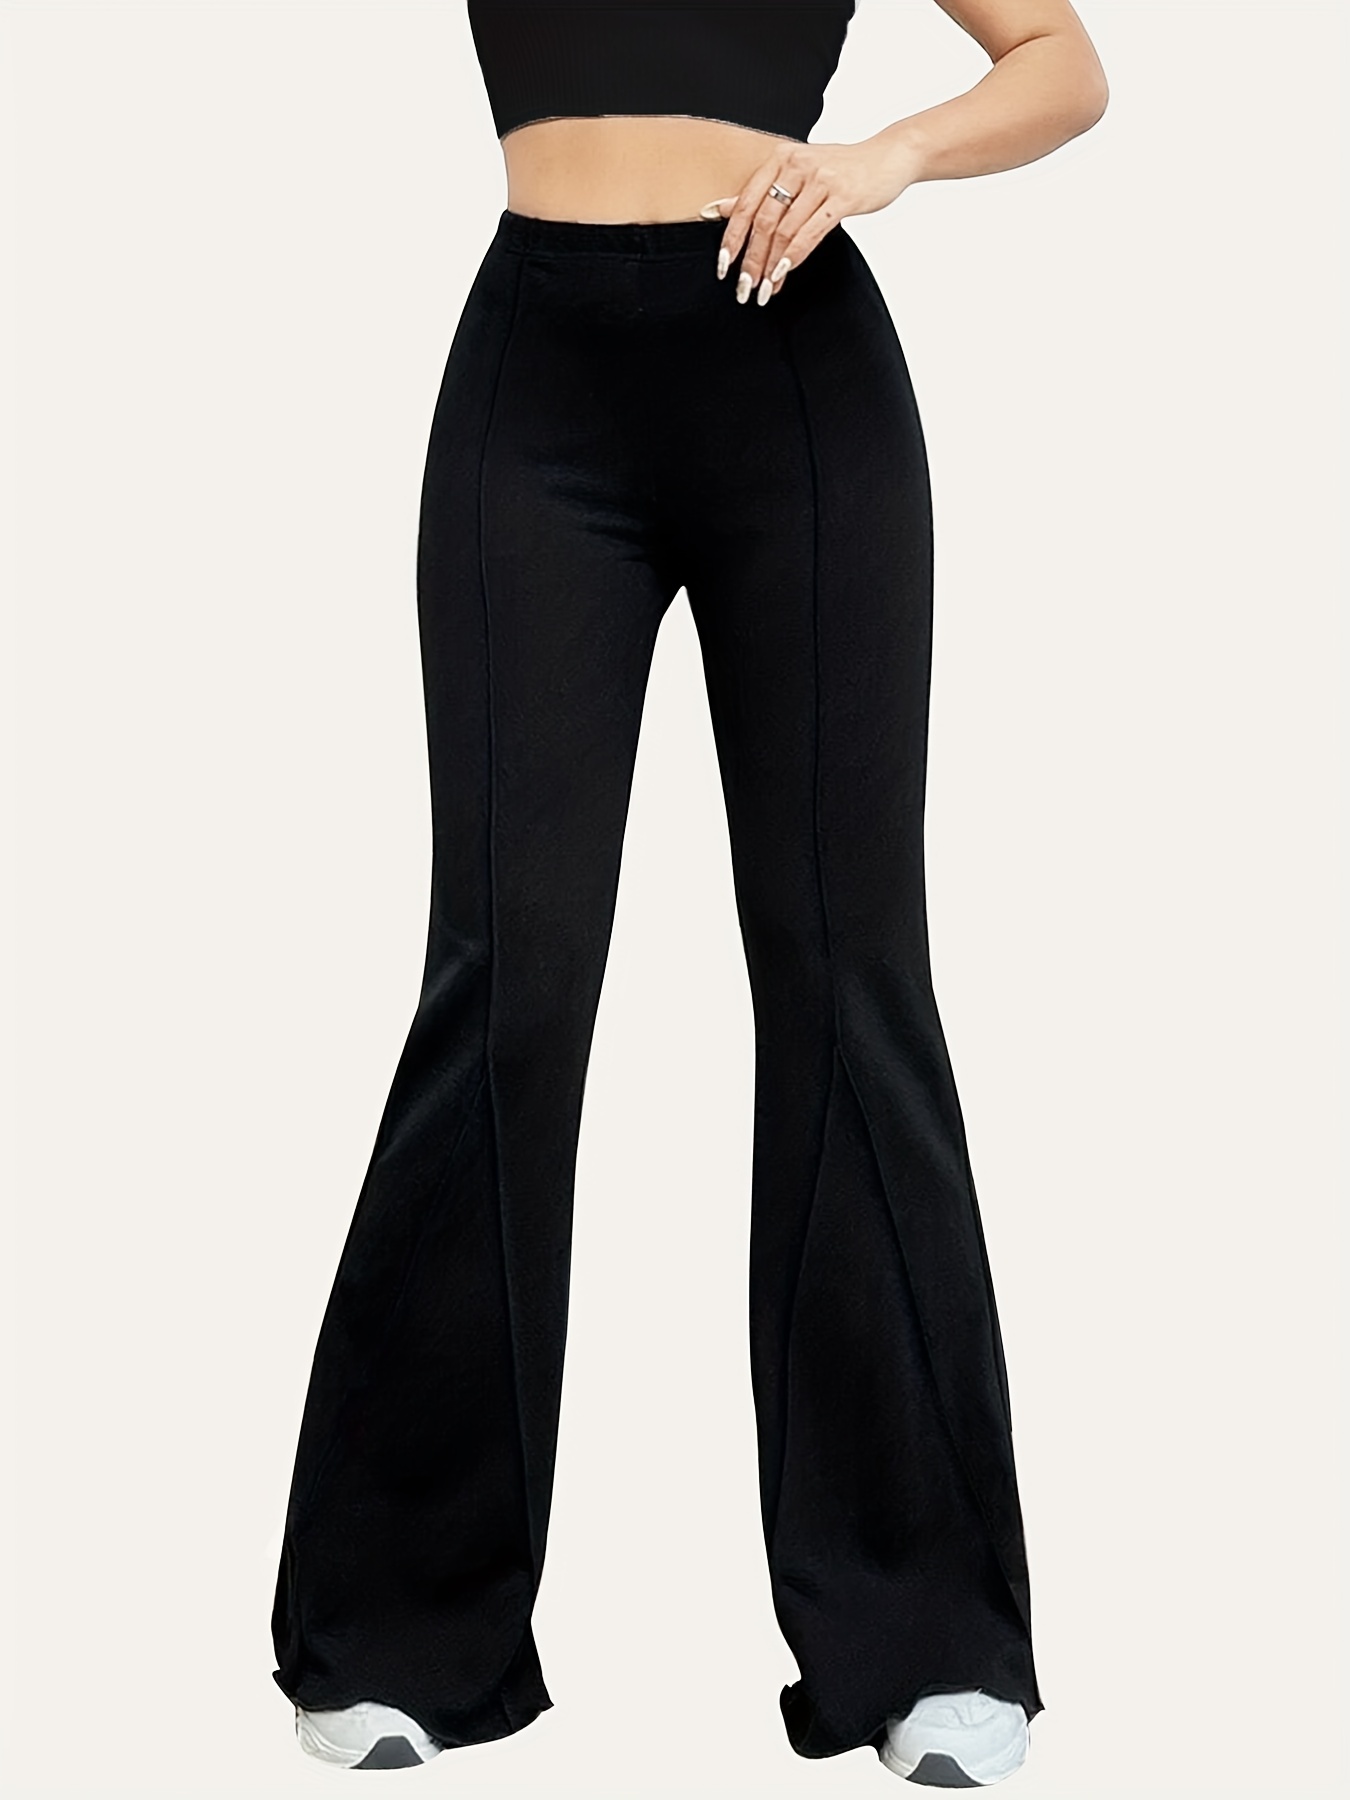 Women's Bootcut Yoga Pants, High Waisted Workout Casual Flare